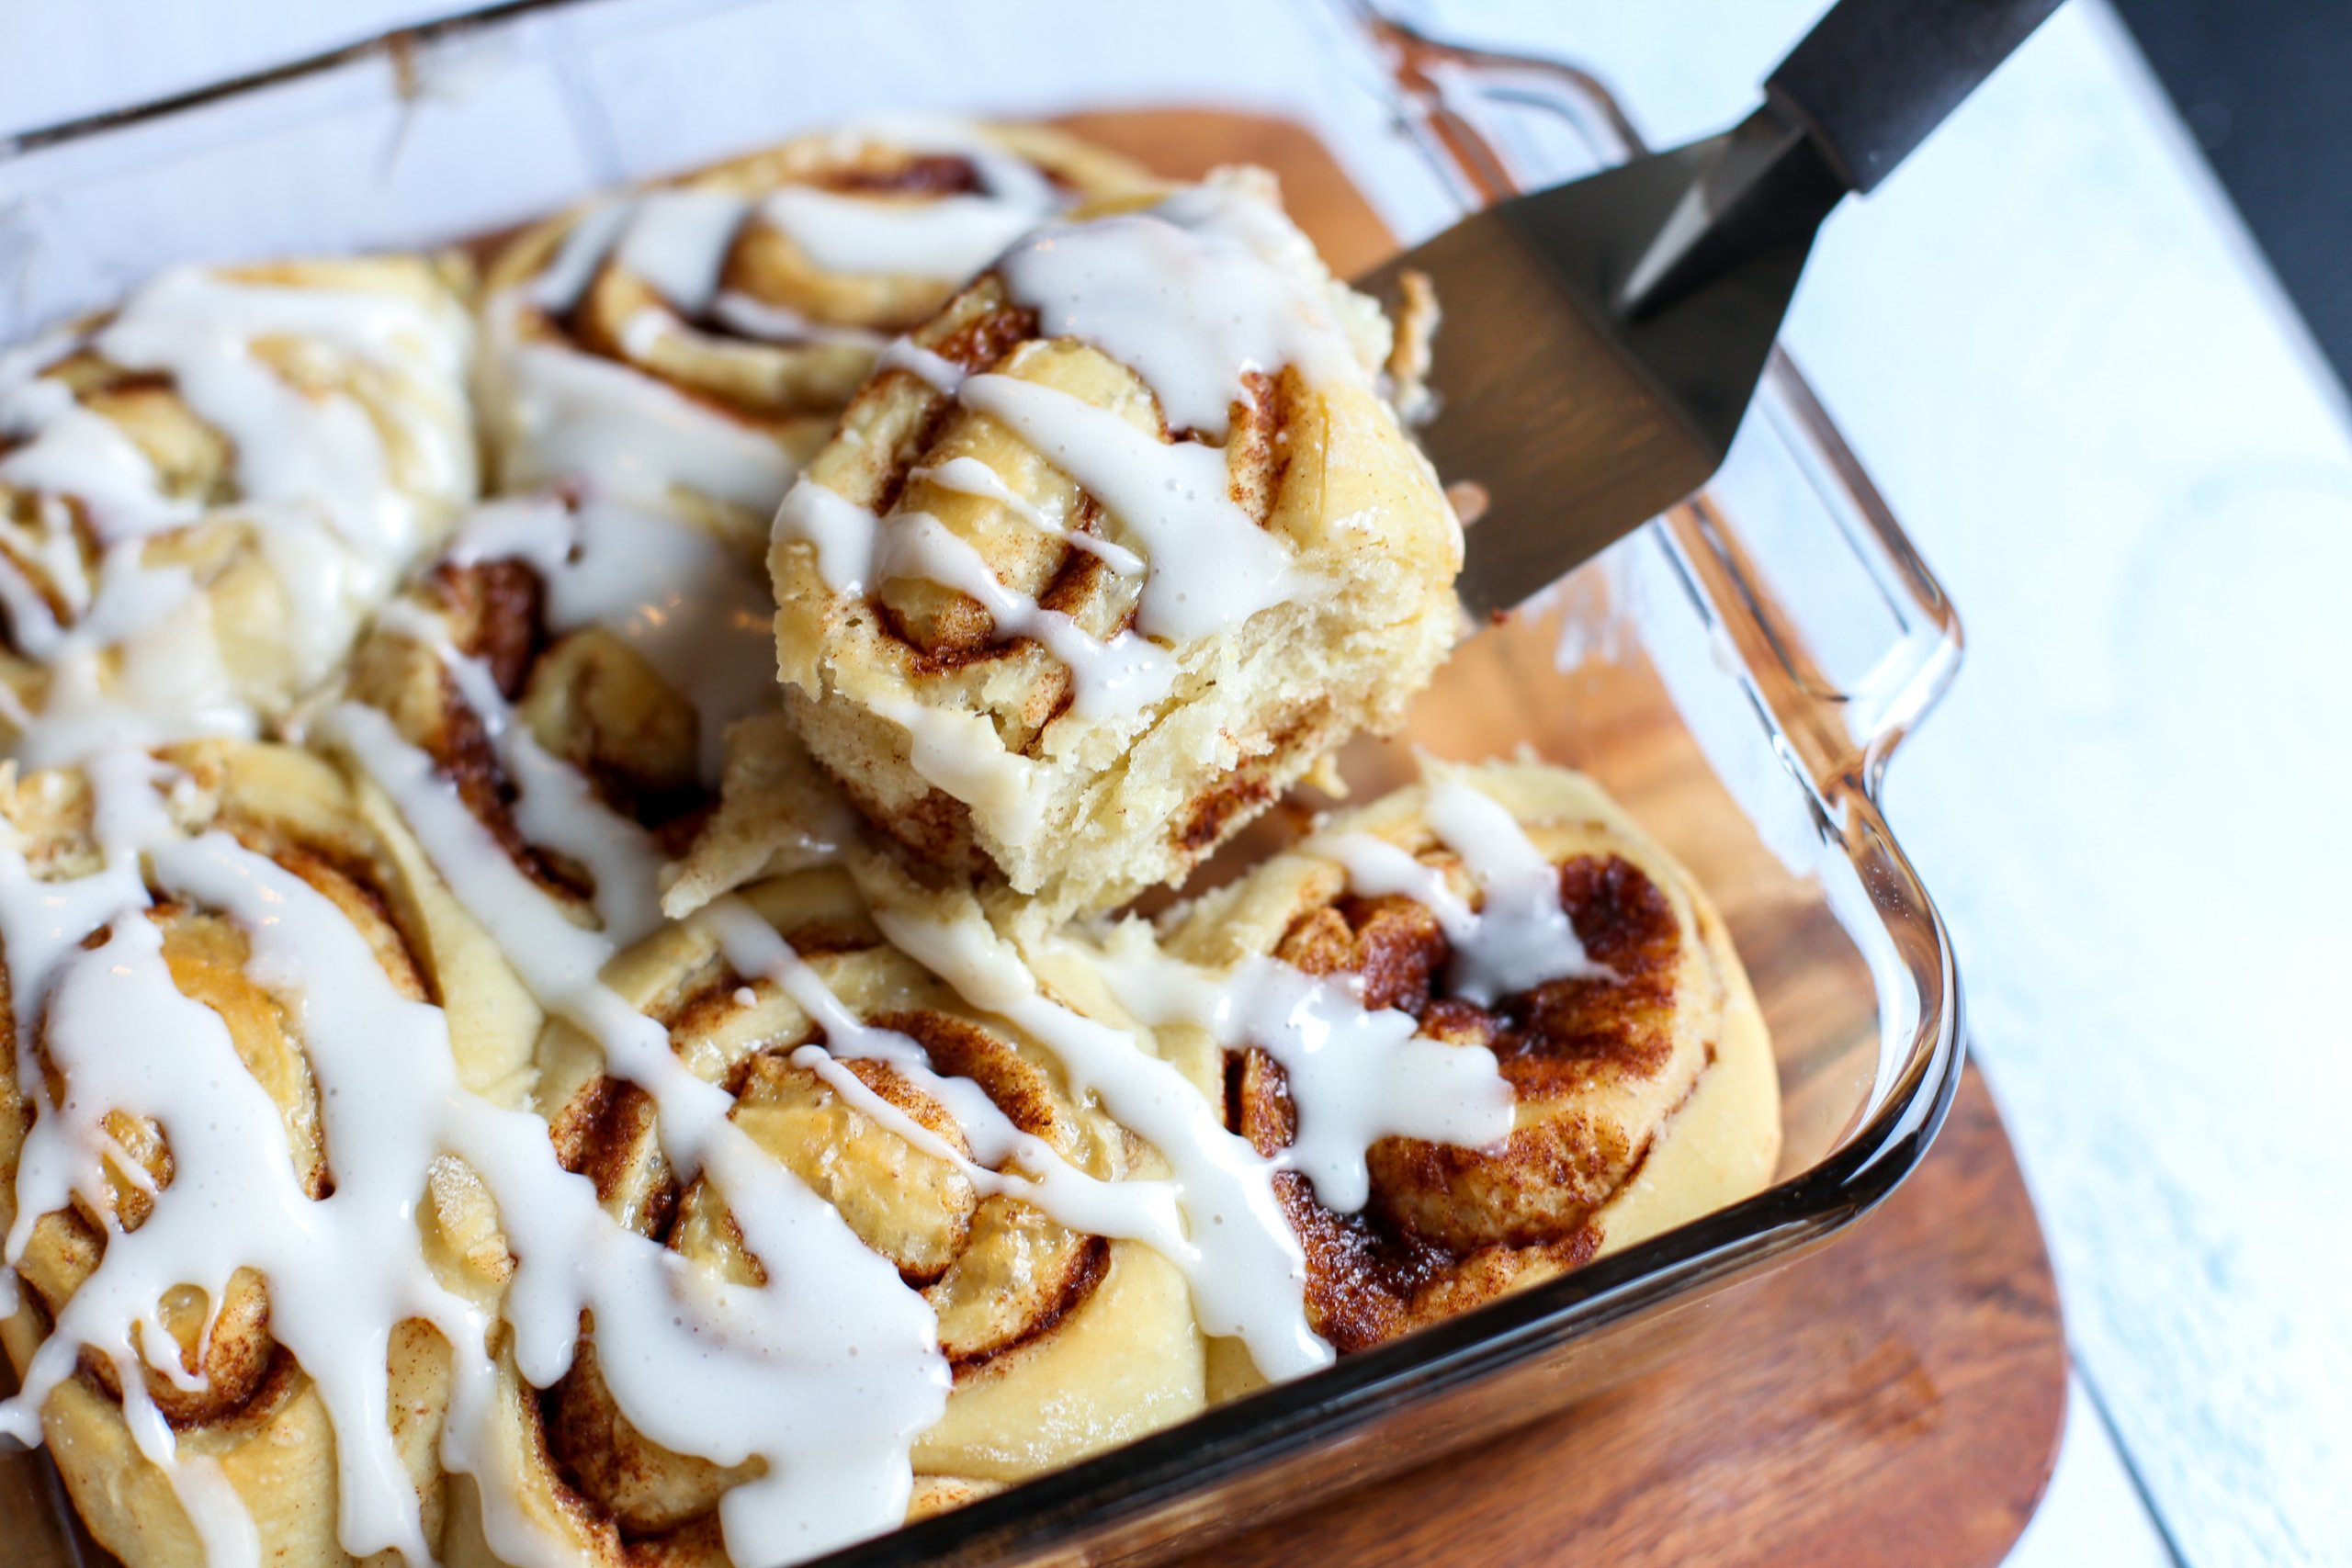 Baked cinnamon rolls being lifted out of a glass baking dish.